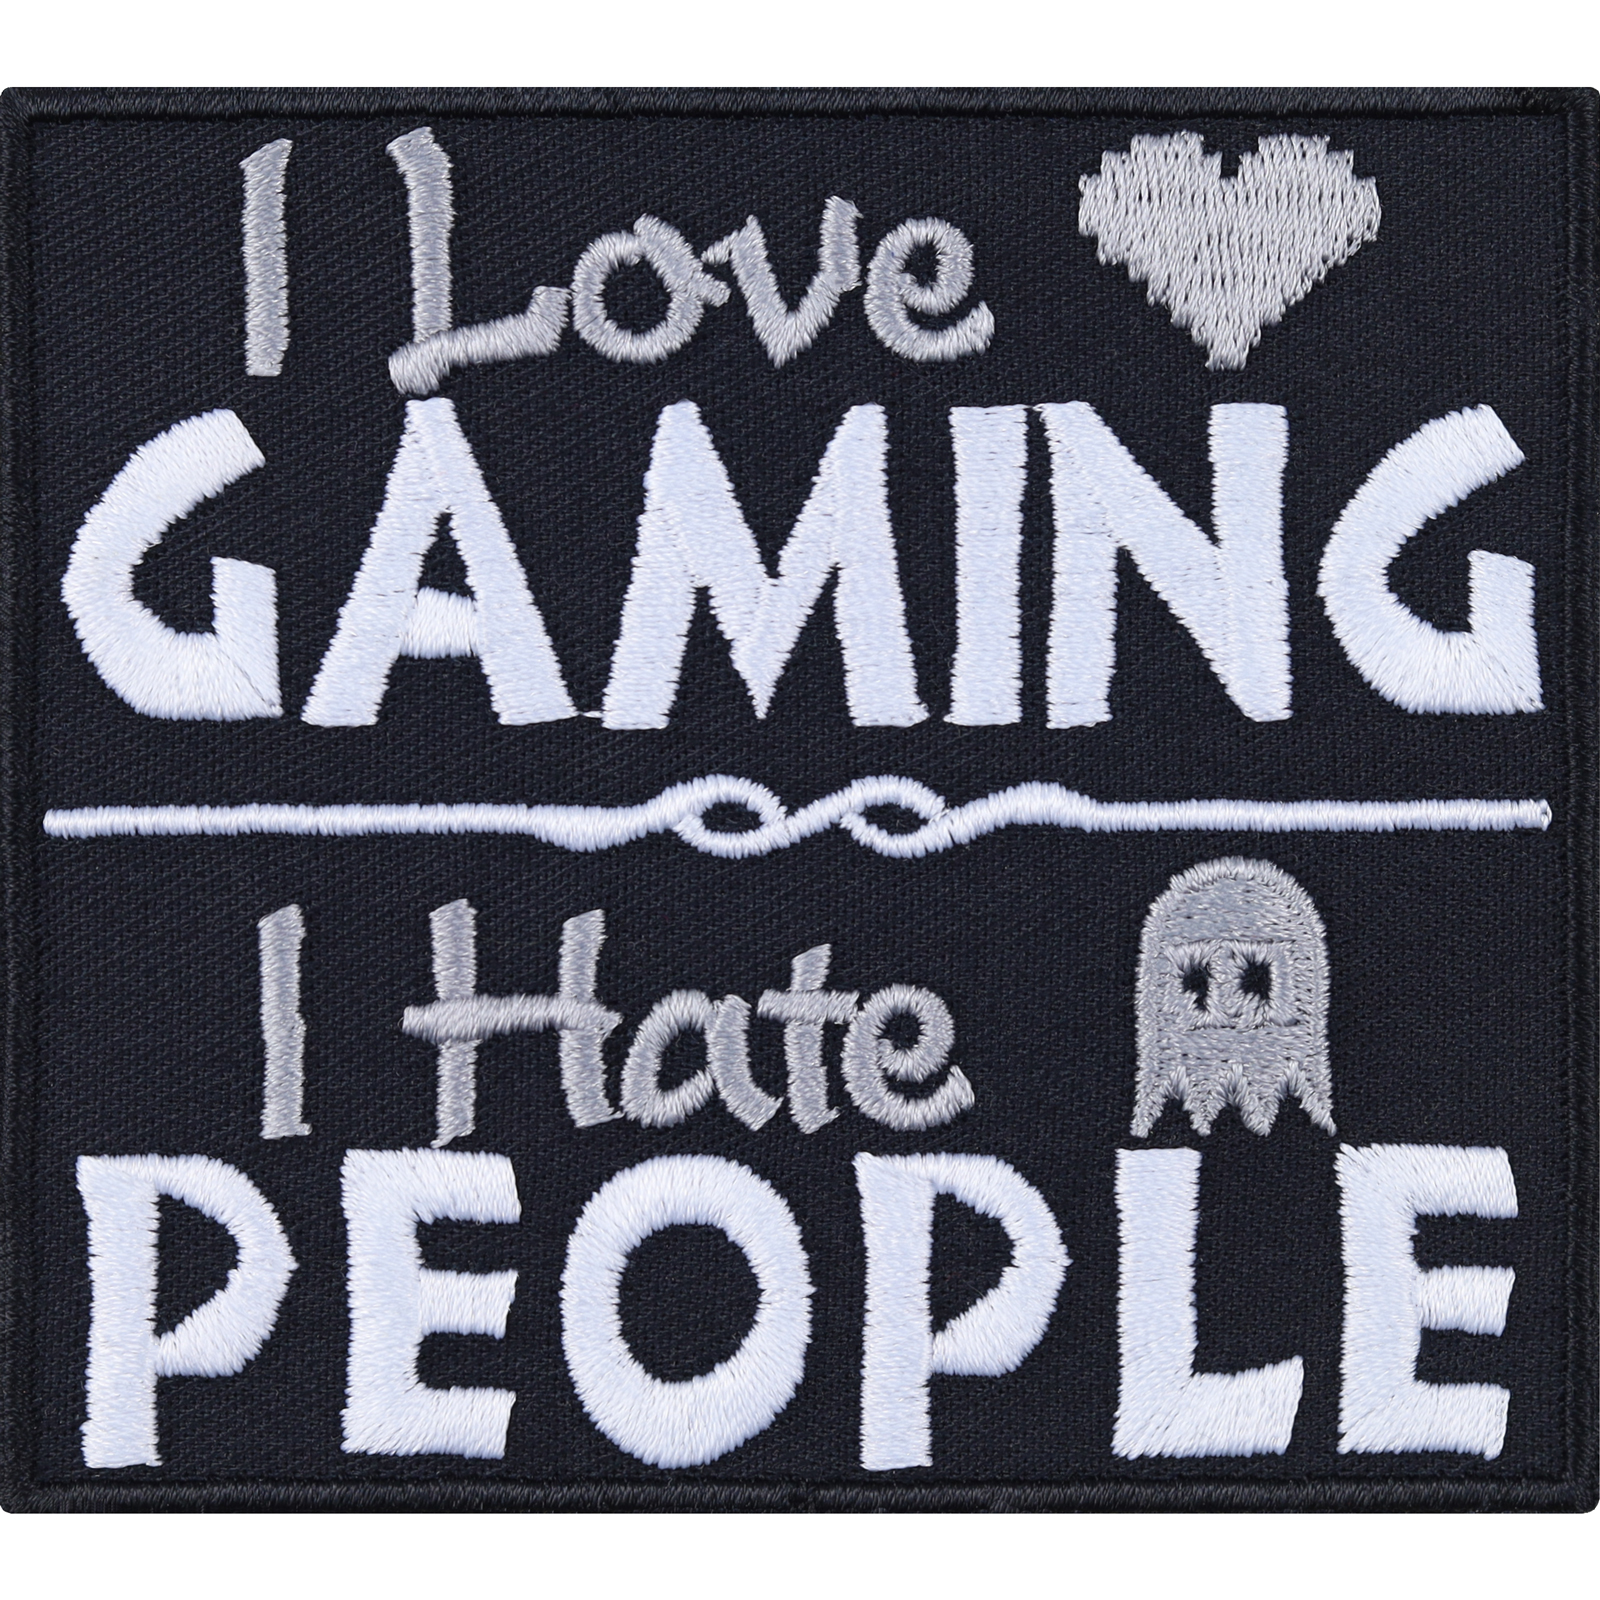 I love gaming, I hate people - Patch